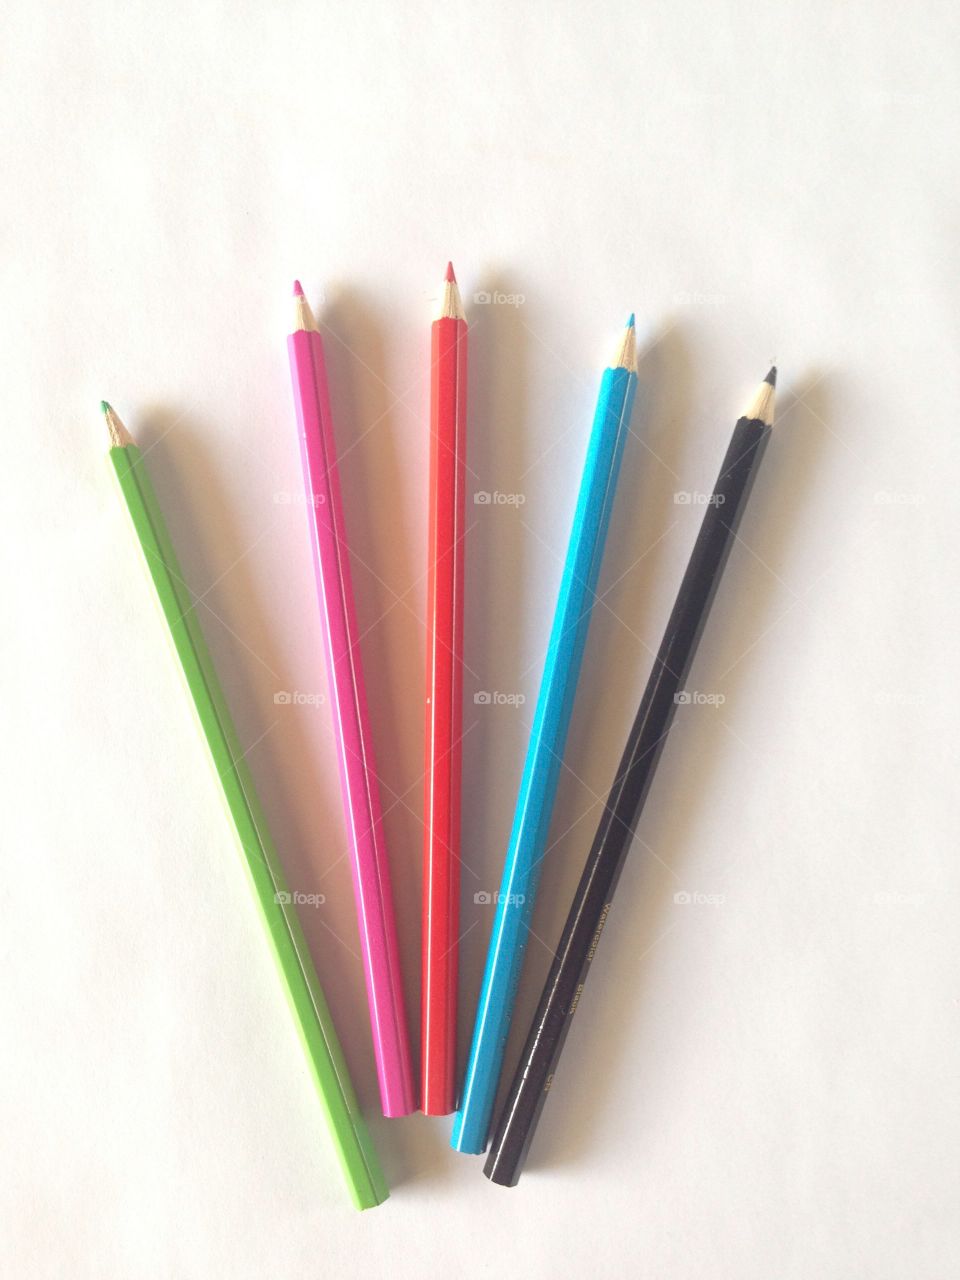 Colored pencils on a white background. Art and craft supplies photo. Back-to-school stock image.